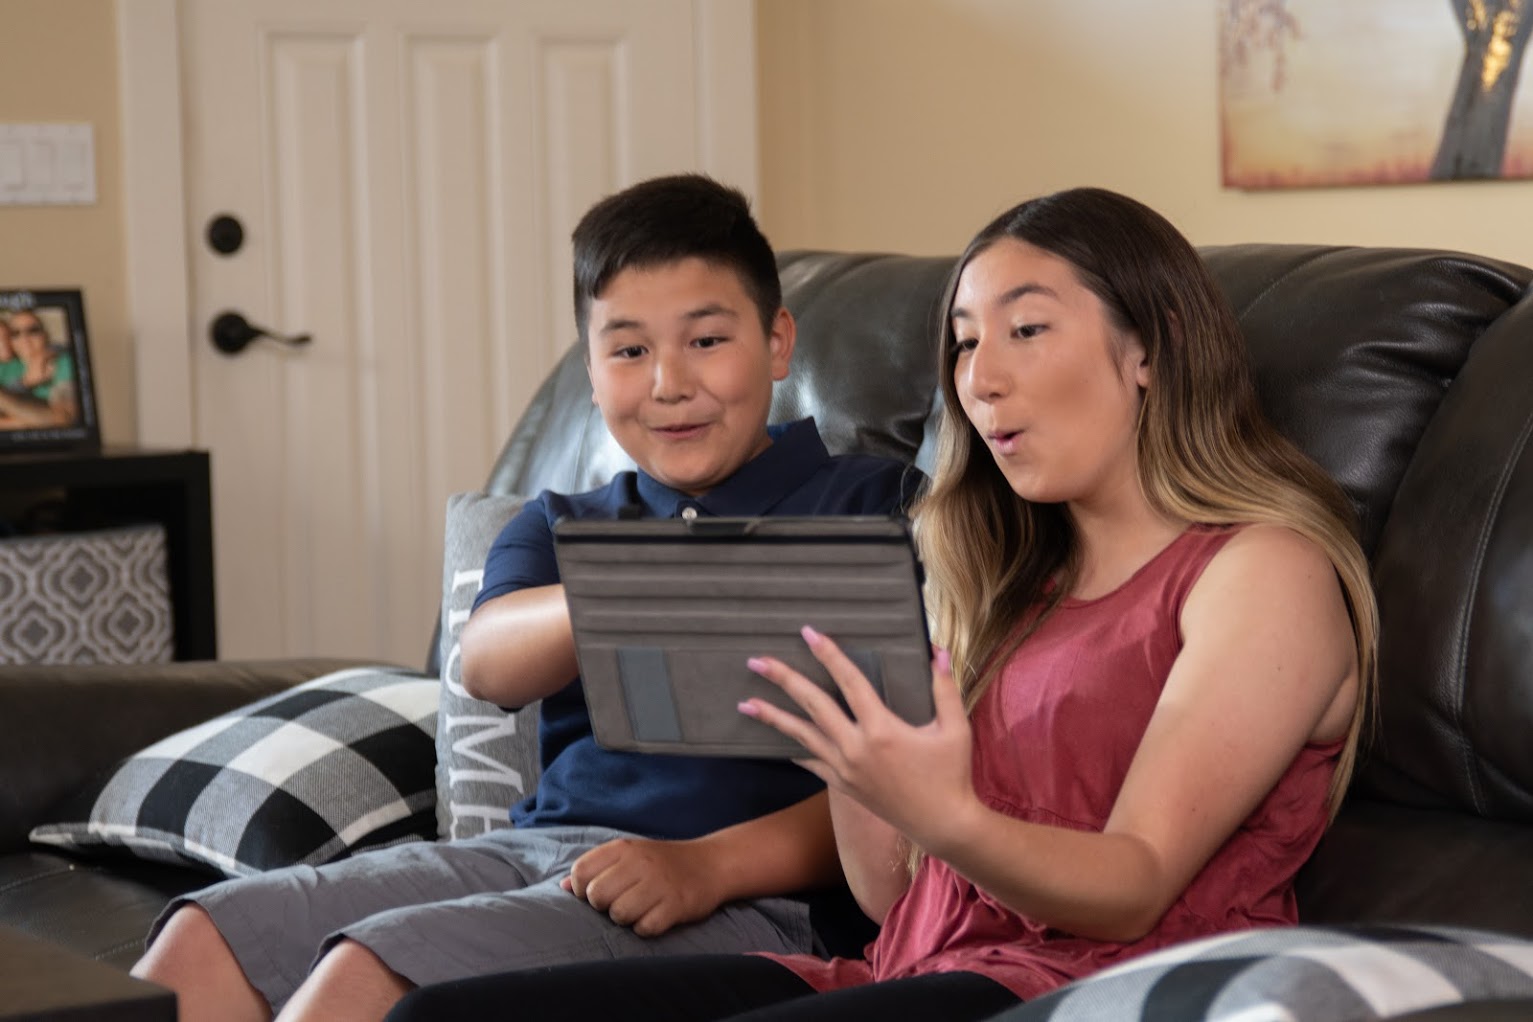 girl and boy sitting on a couch looking at a tablet in girl's hands